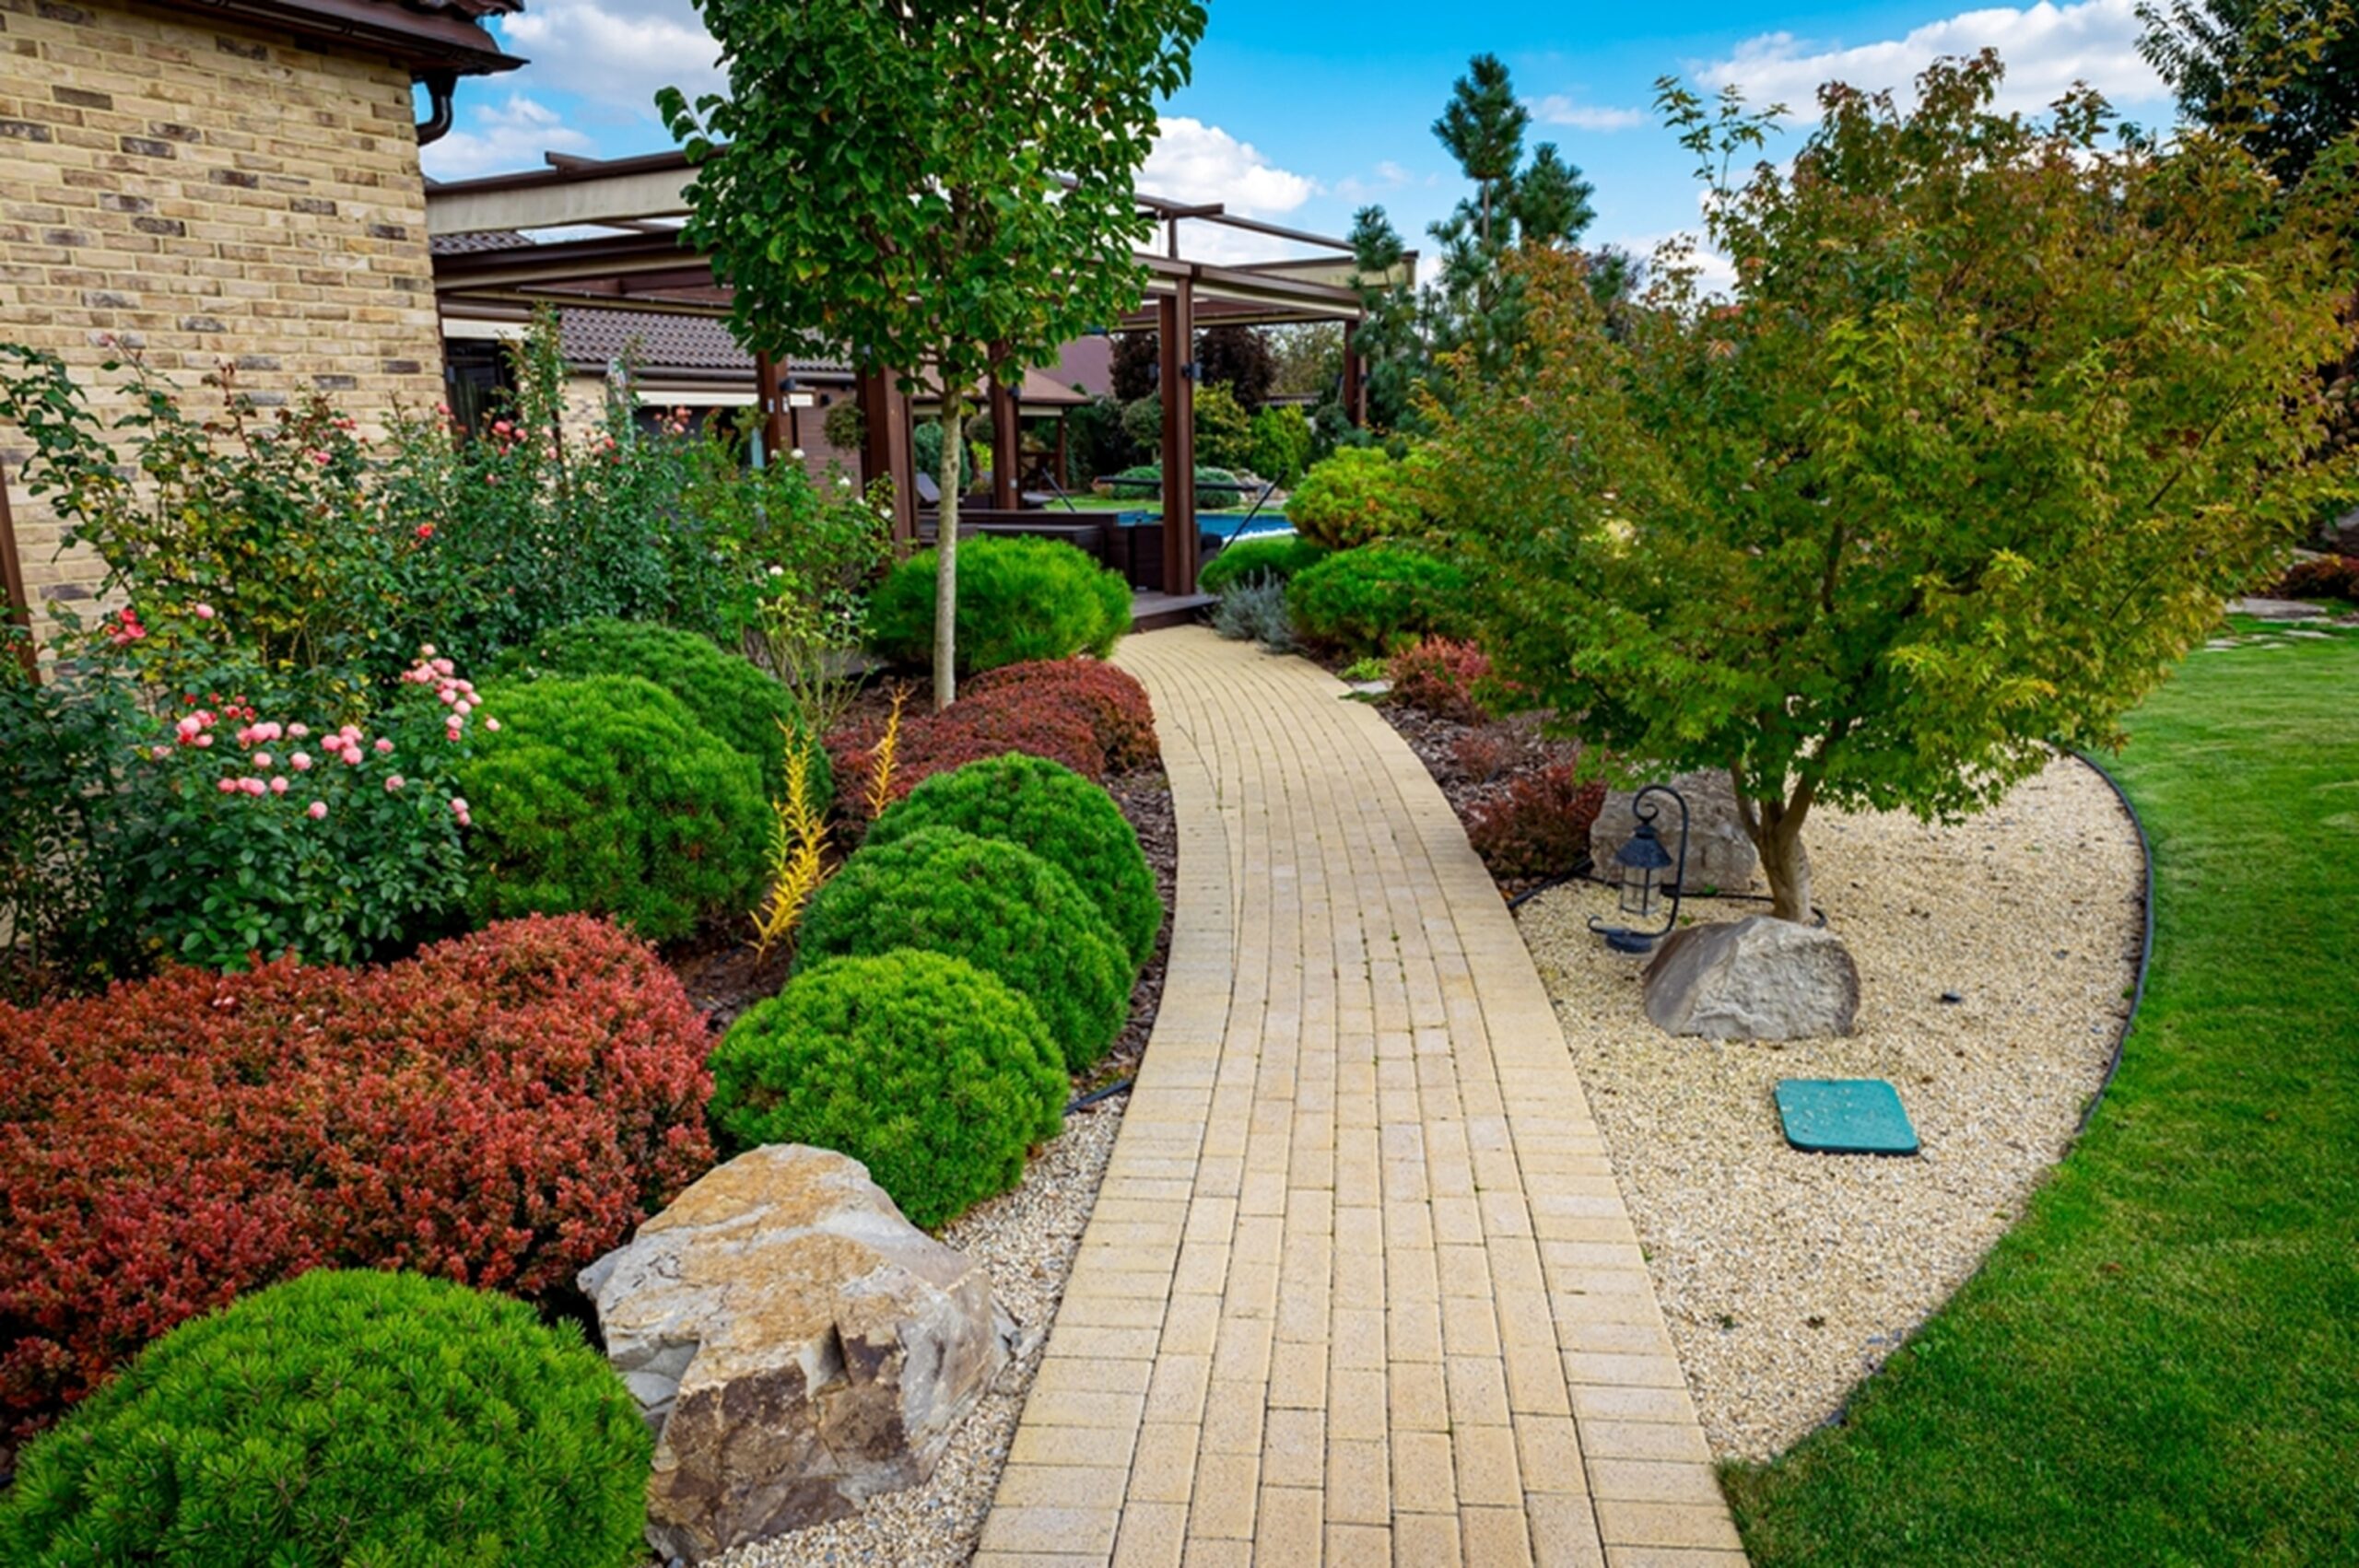 Transform Your Yard with Professional Yard Services in Spring, TX